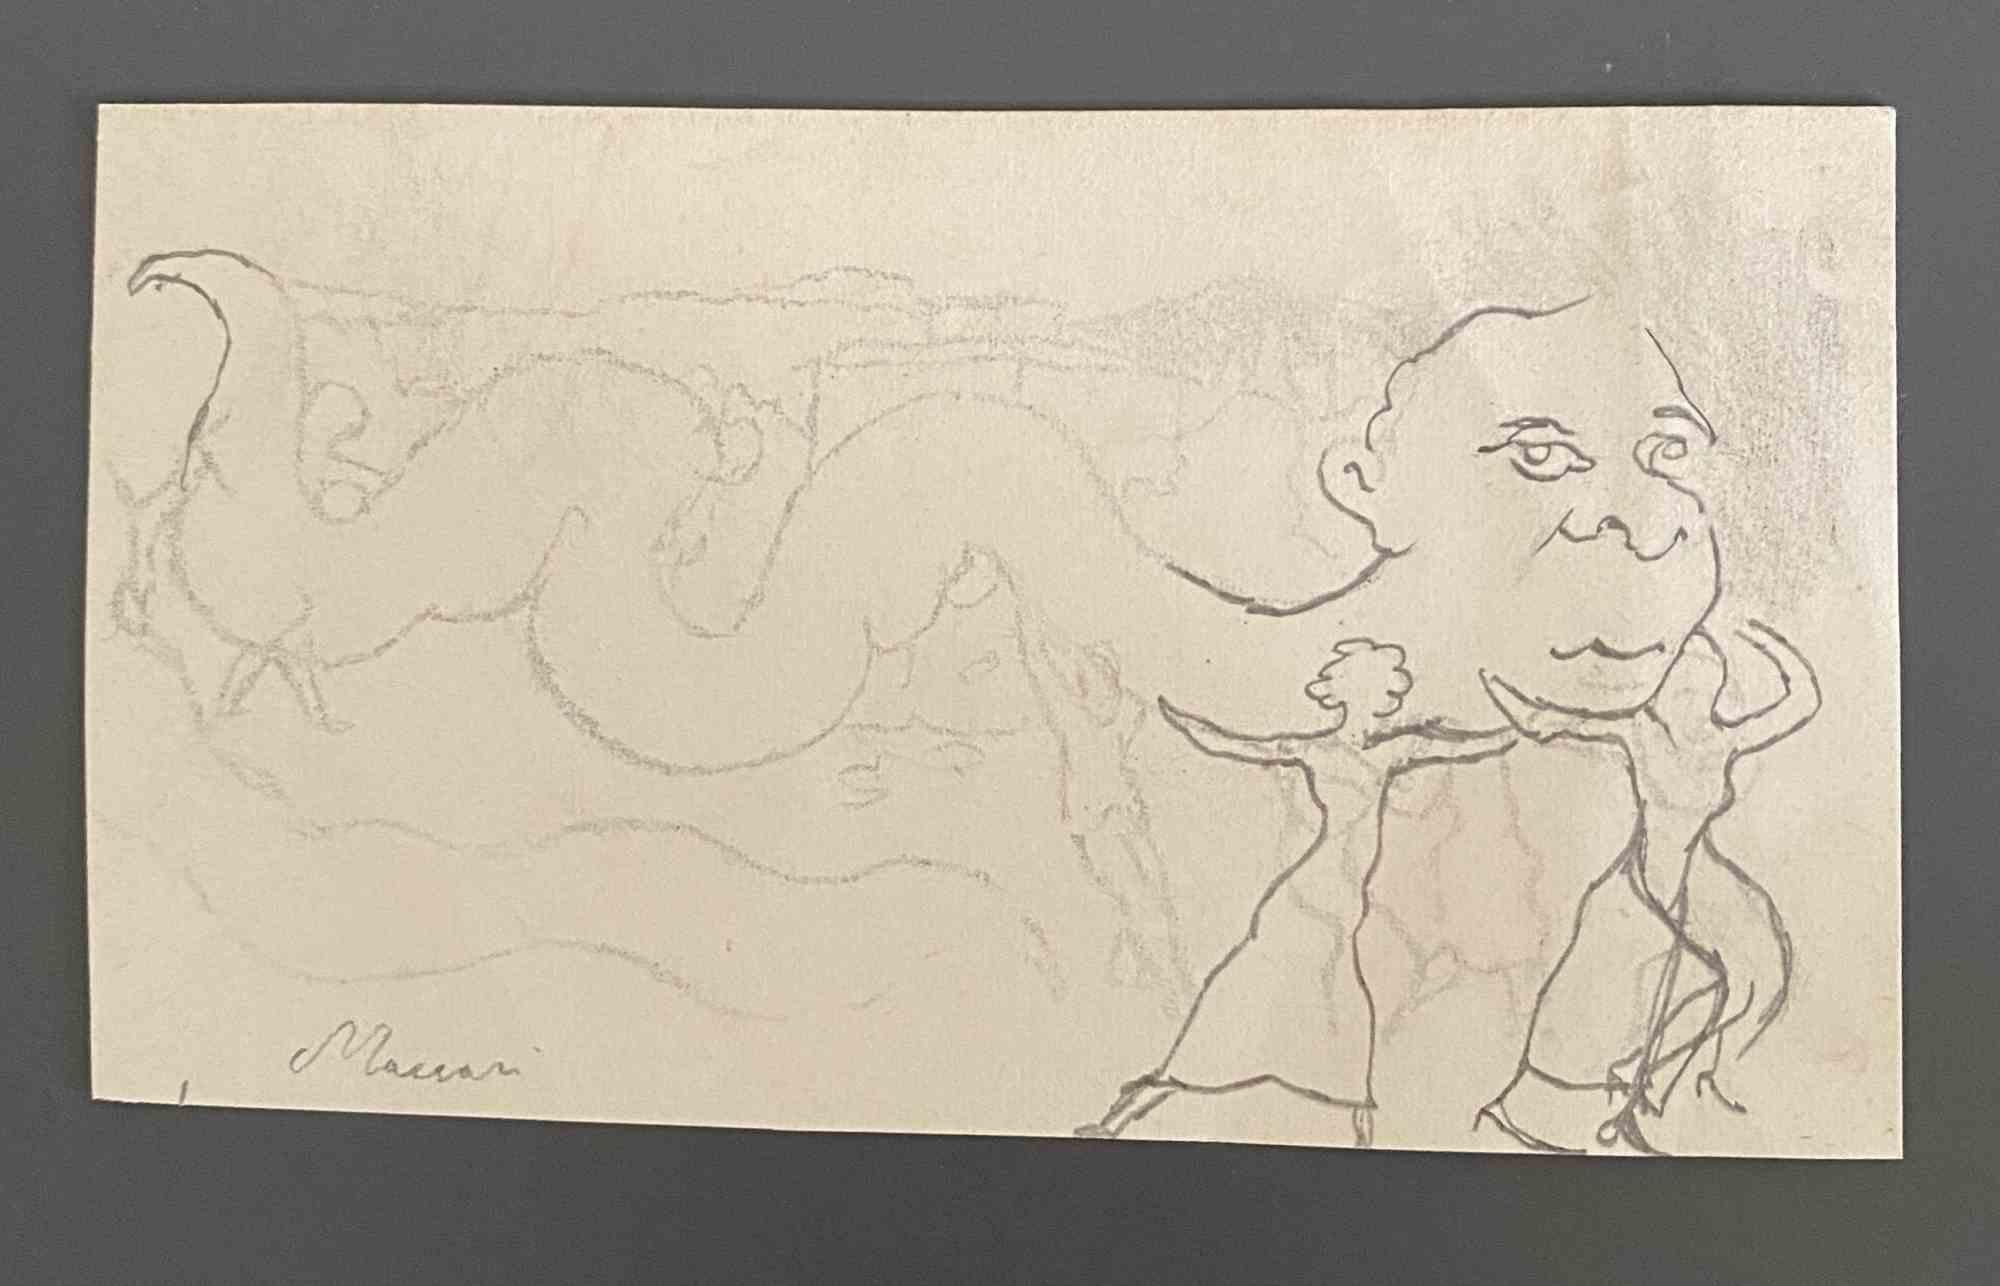 The Serpent is a pencil Drawing realized by Mino Maccari  (1924-1989) in the Mid-20th Century.

Hand-signed on the lower.

Good conditions.

Mino Maccari (Siena, 1924-Rome, June 16, 1989) was an Italian writer, painter, engraver and journalist,